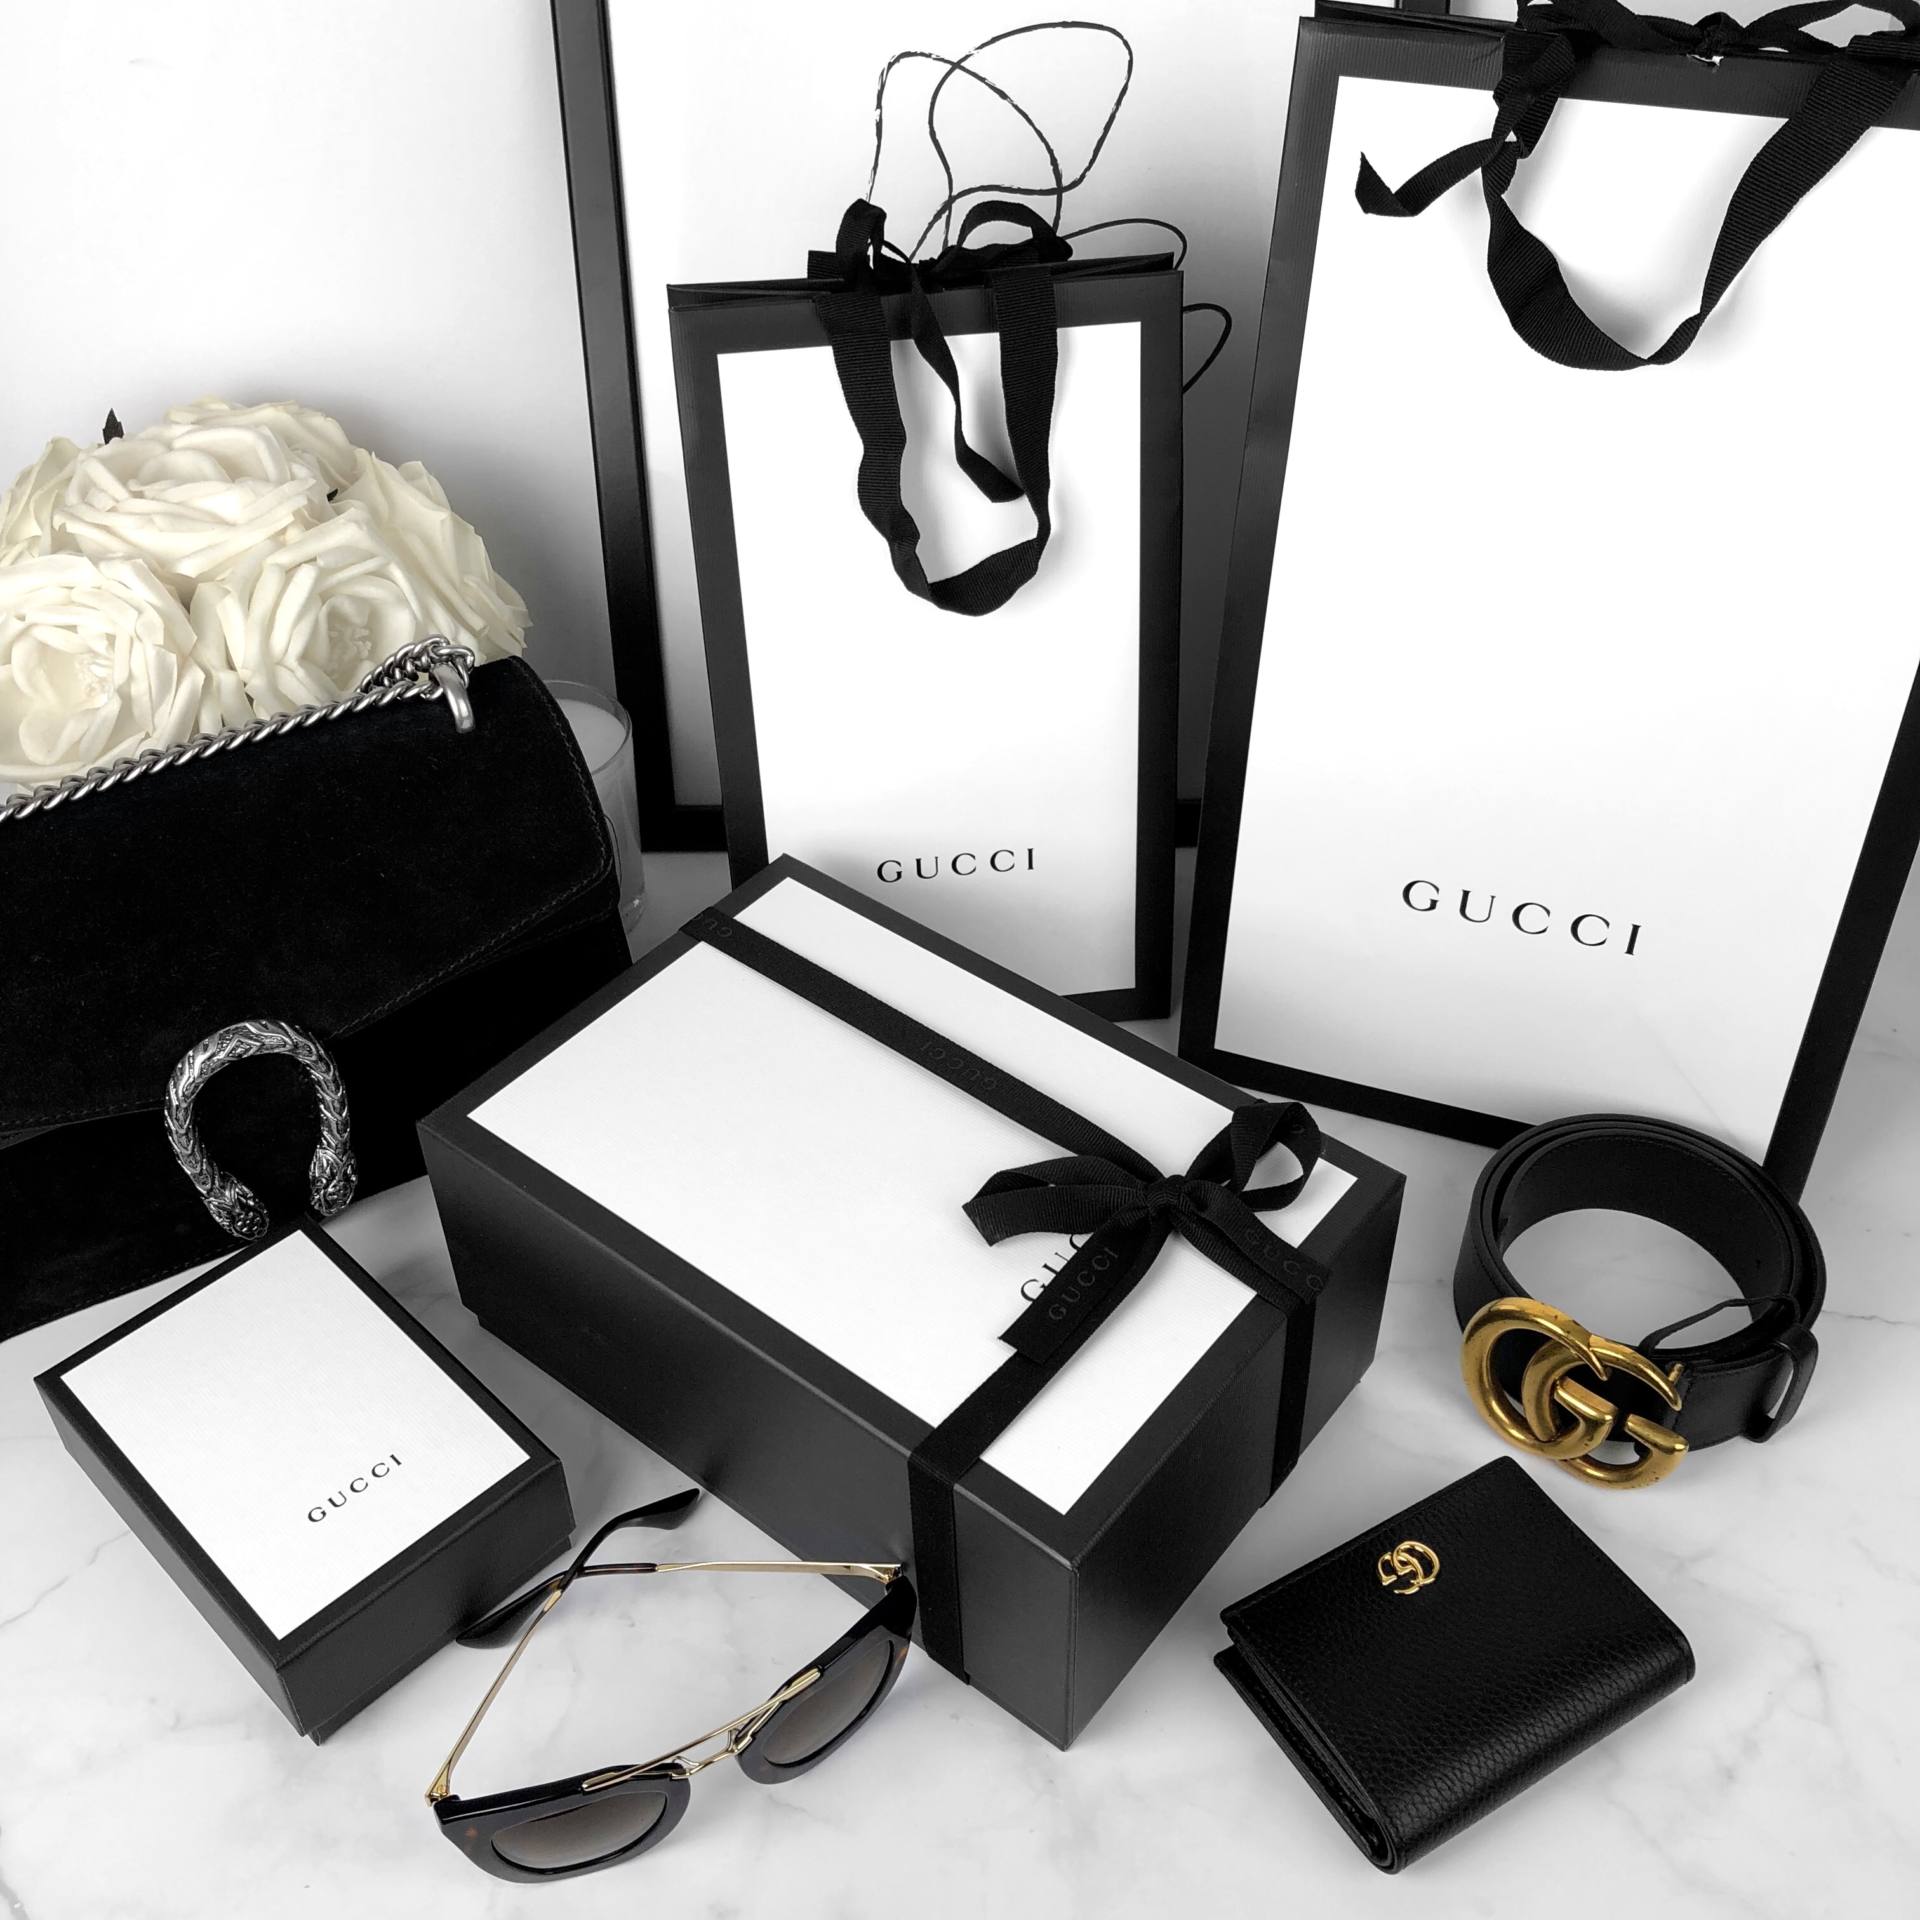 Unboxing GUCCI Bag  What's in my bag/purse???? 2020 